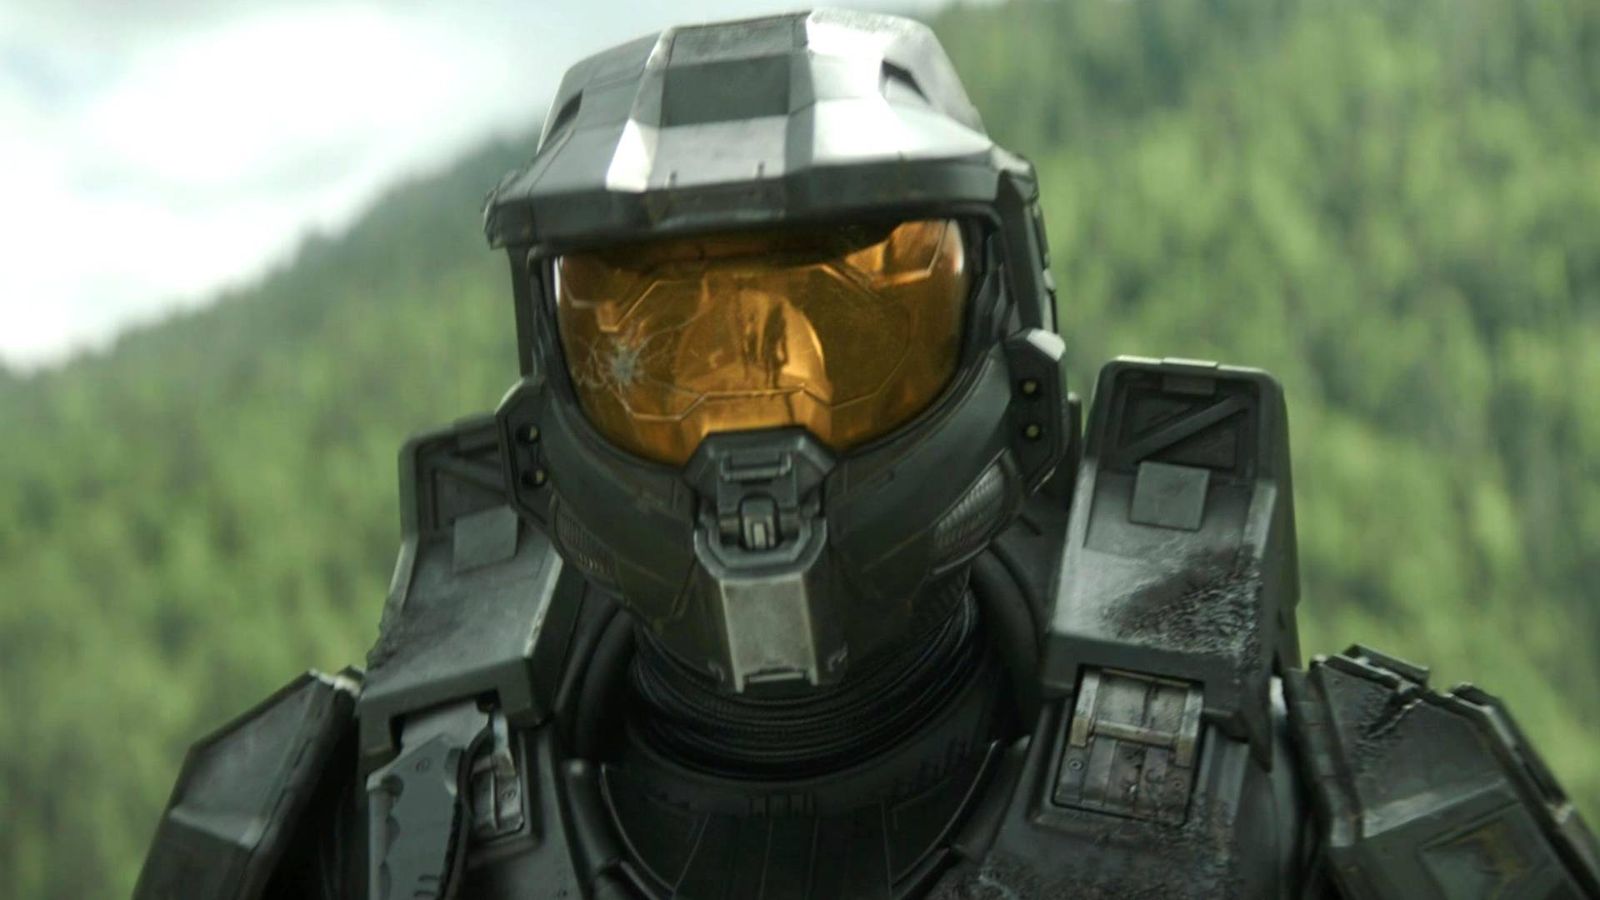 A close up of Master Chief from Halo Season 2 